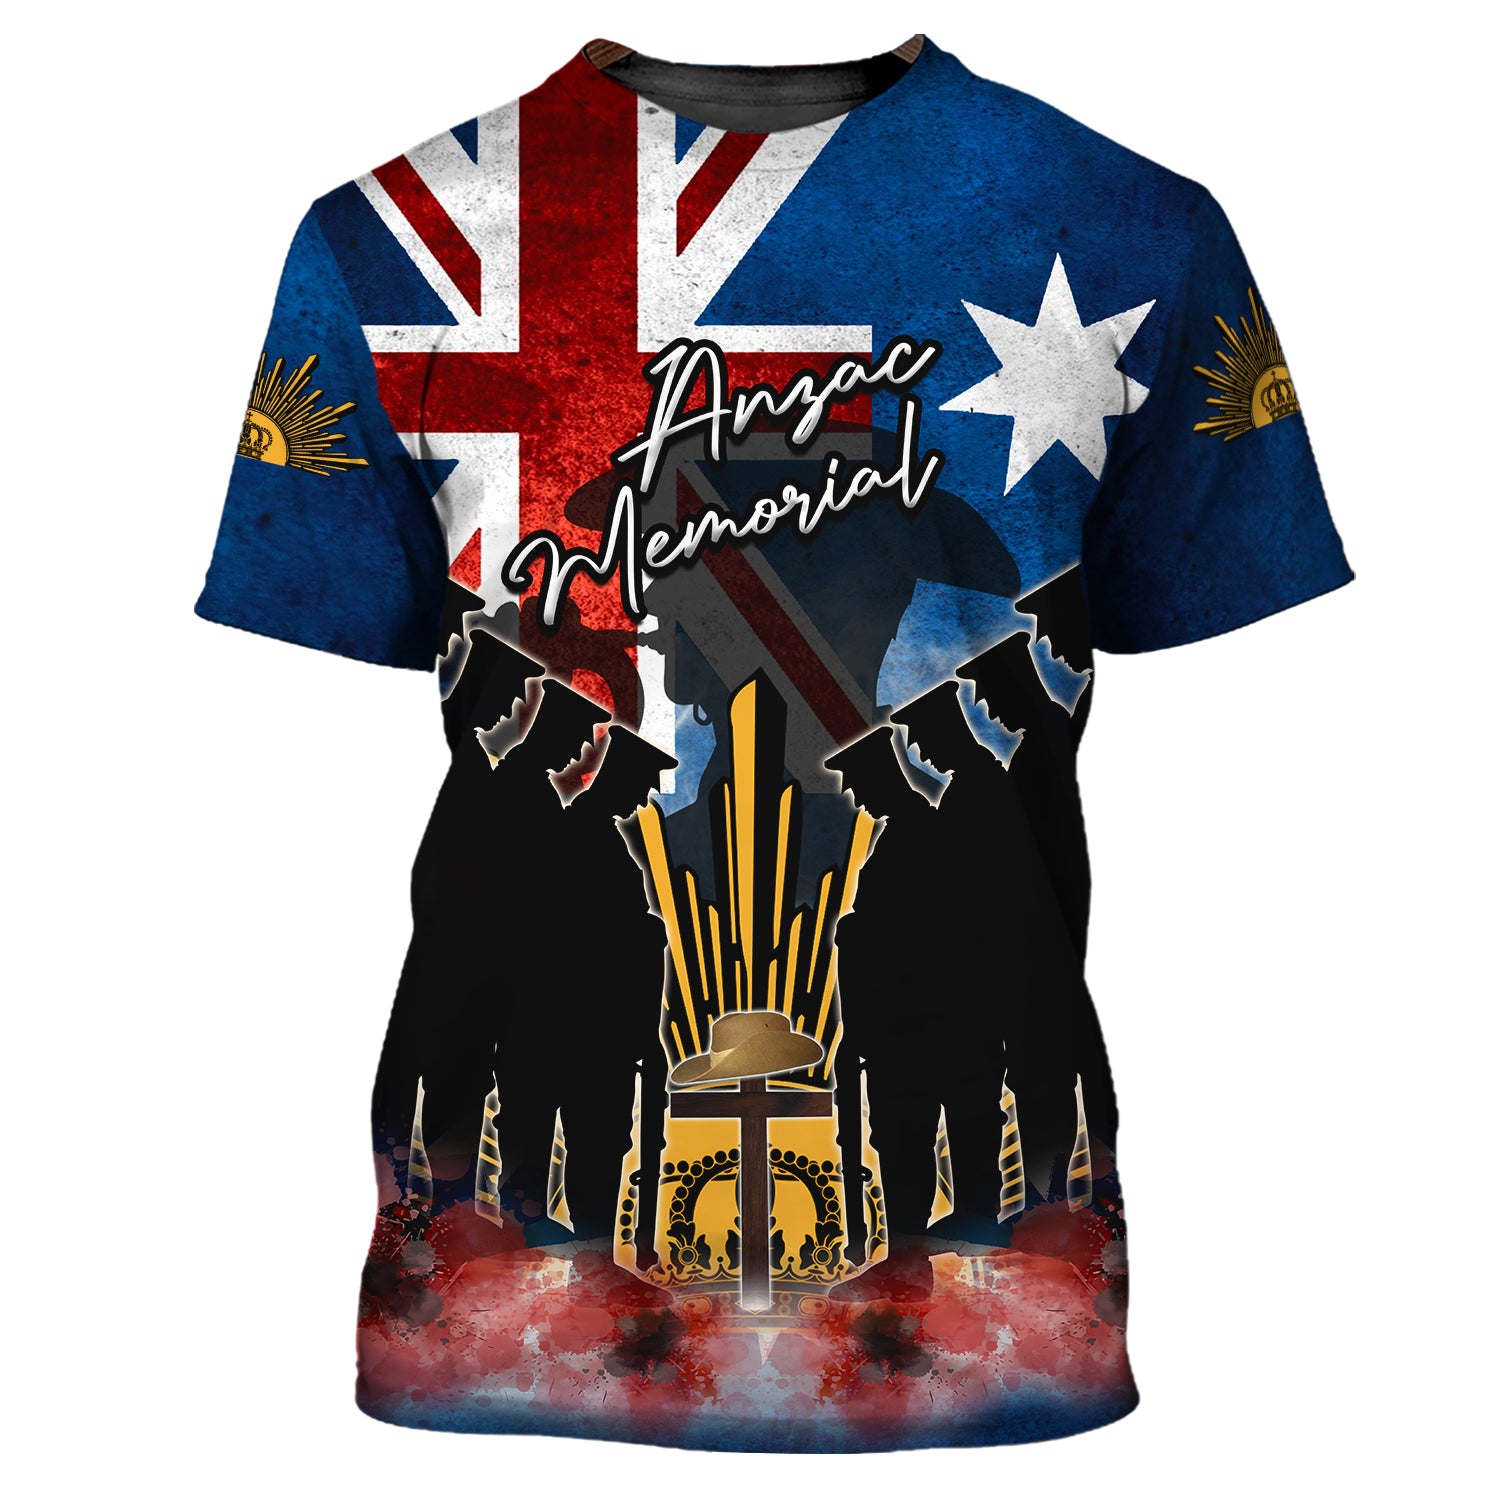 Anzac Day 25 April, Lest We Forget, Anzac Memorial 3D Tshirt 363, Nsd99